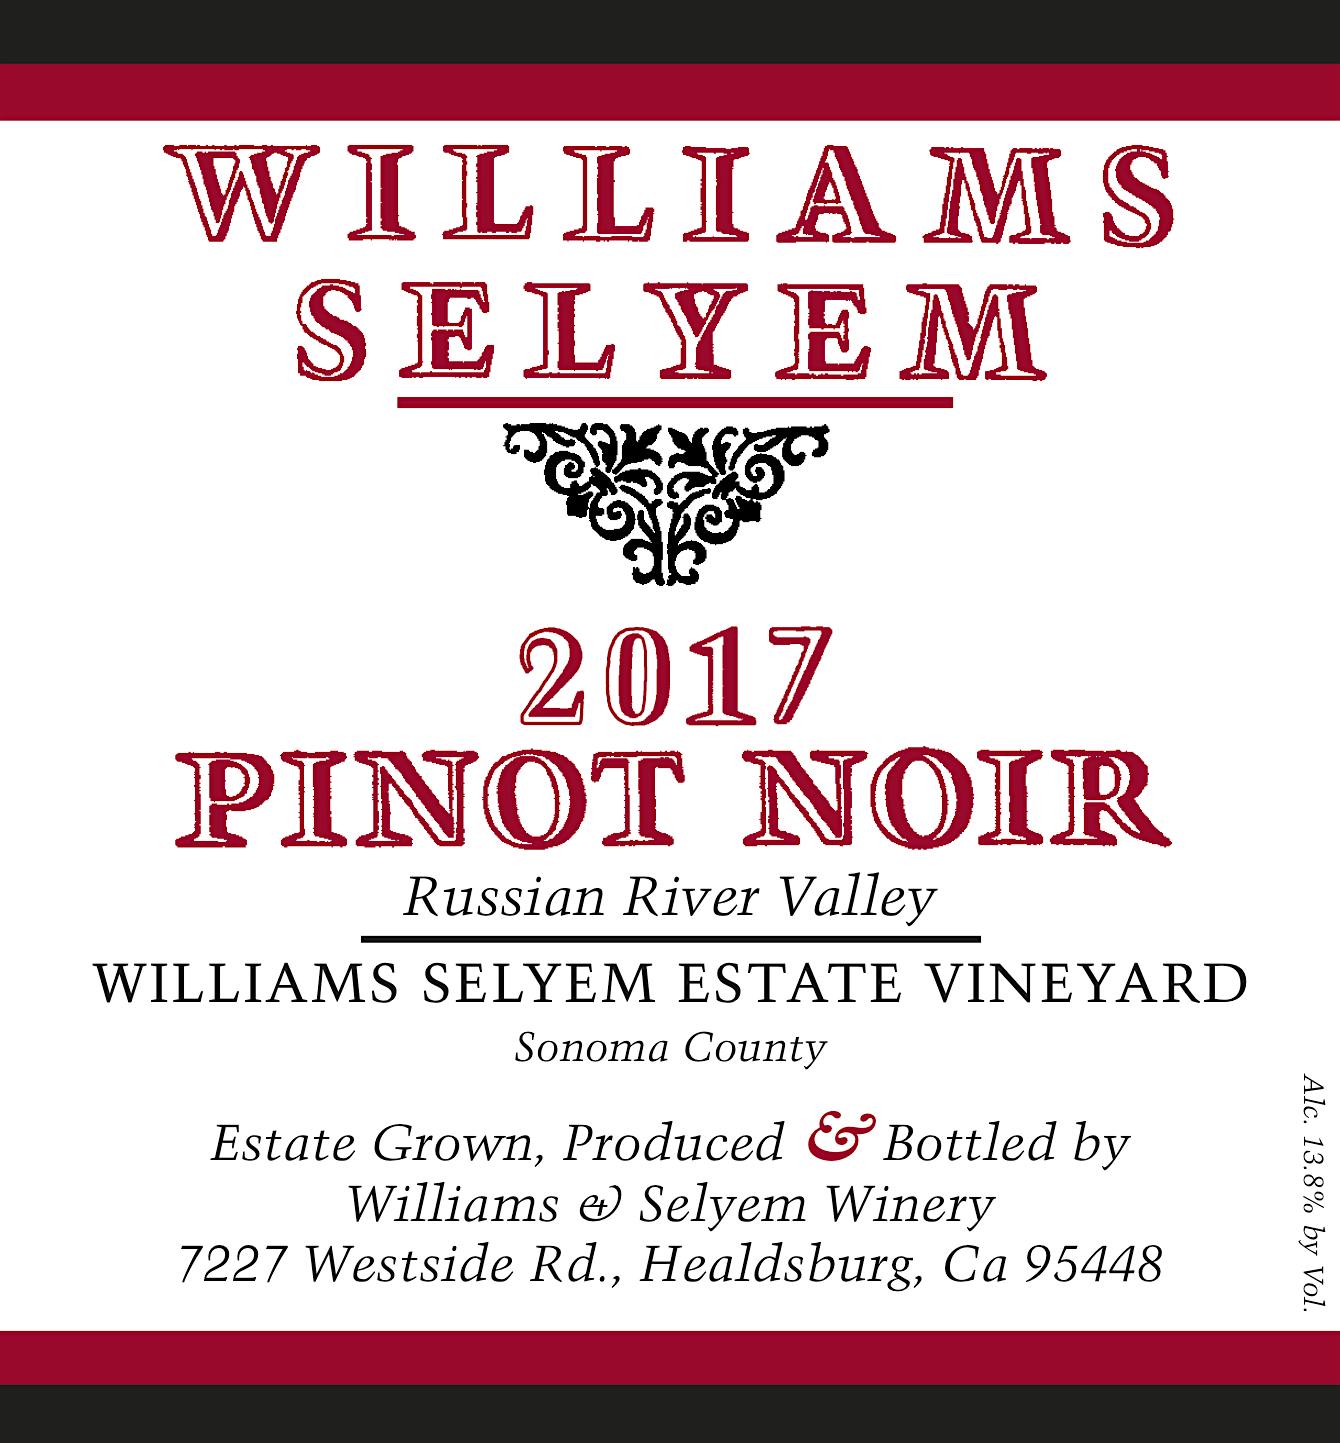 Label for Williams Selyem